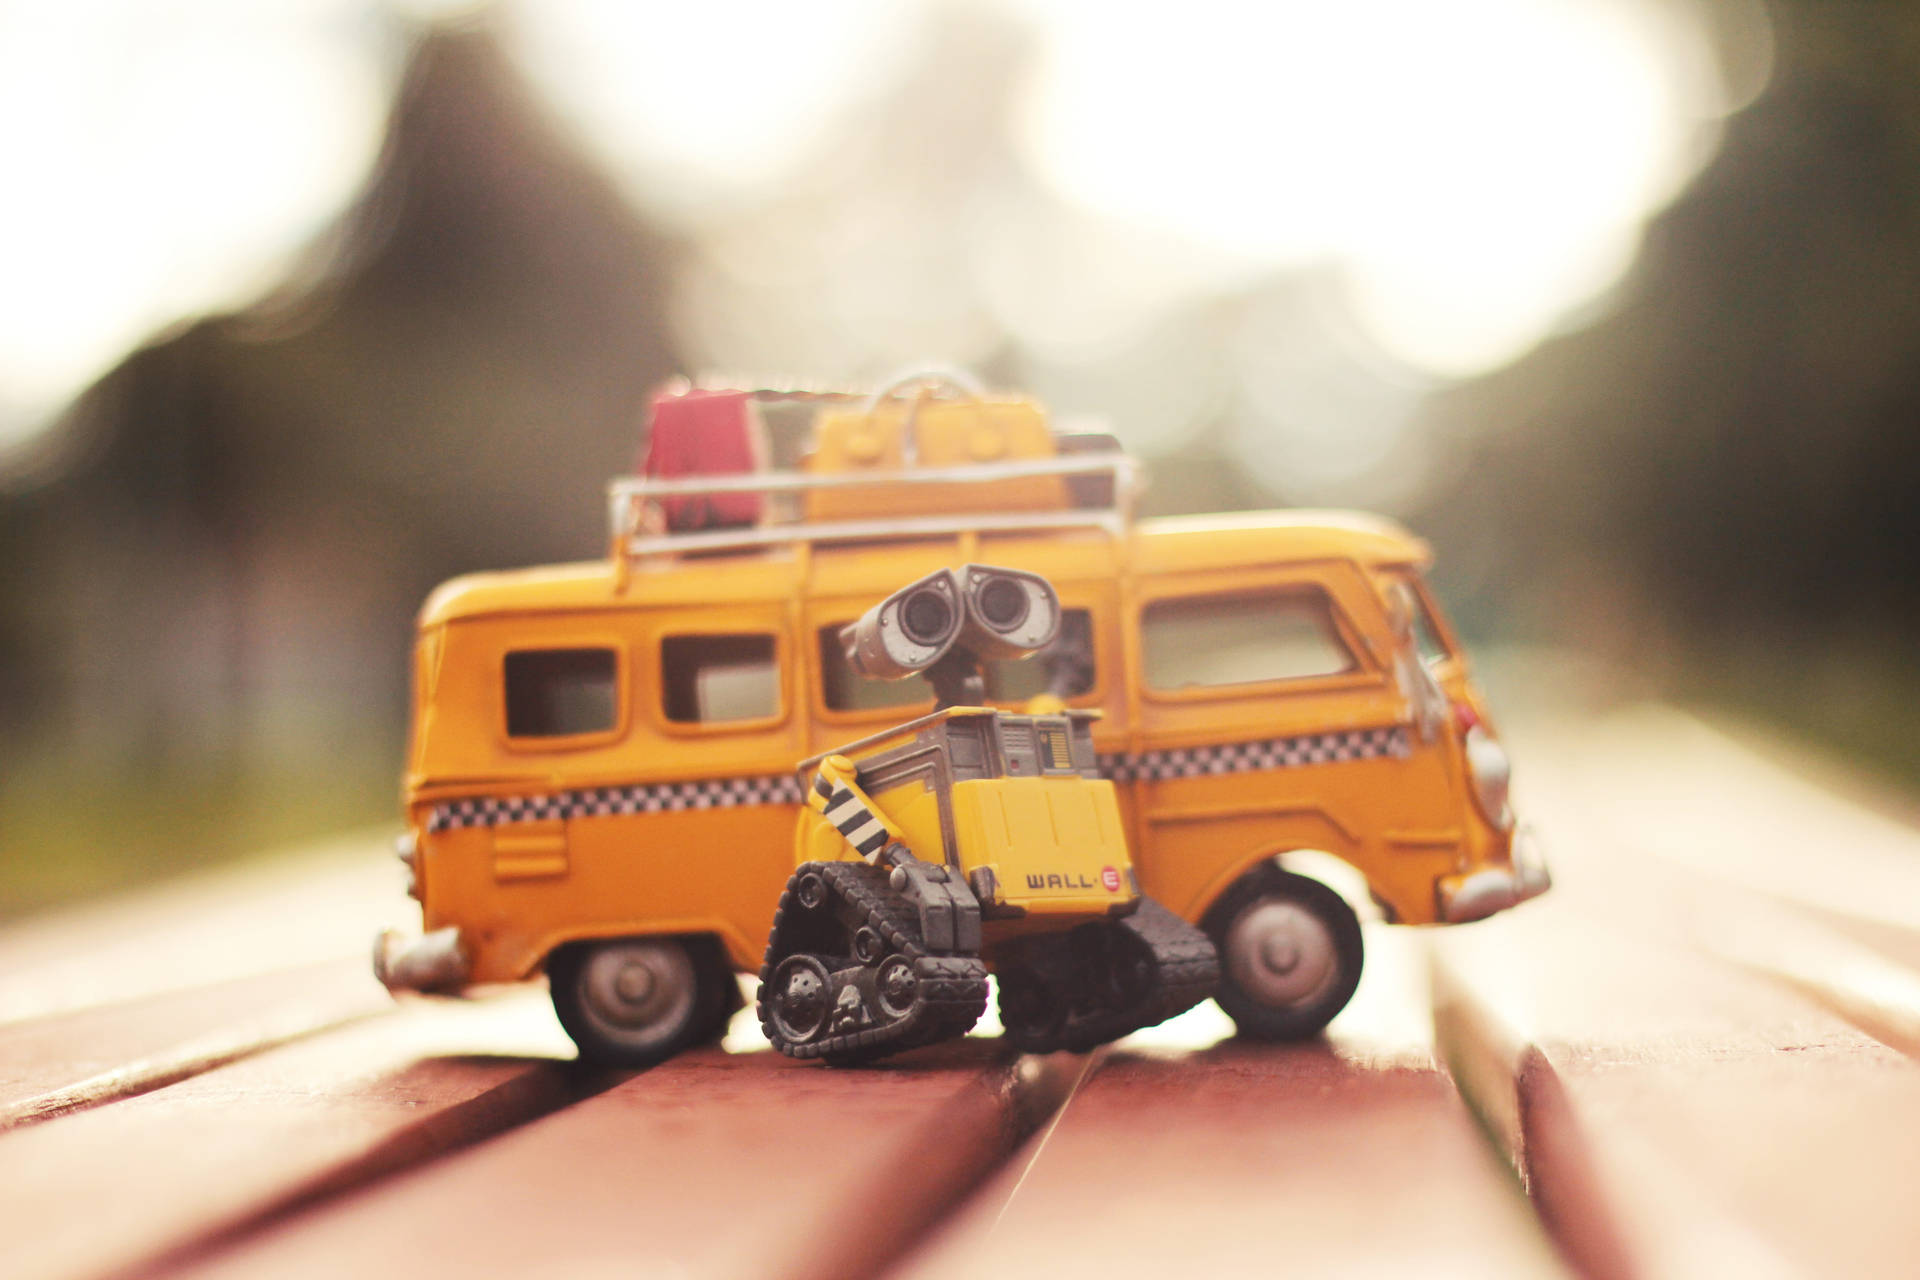 Toy Bus Of Wall E